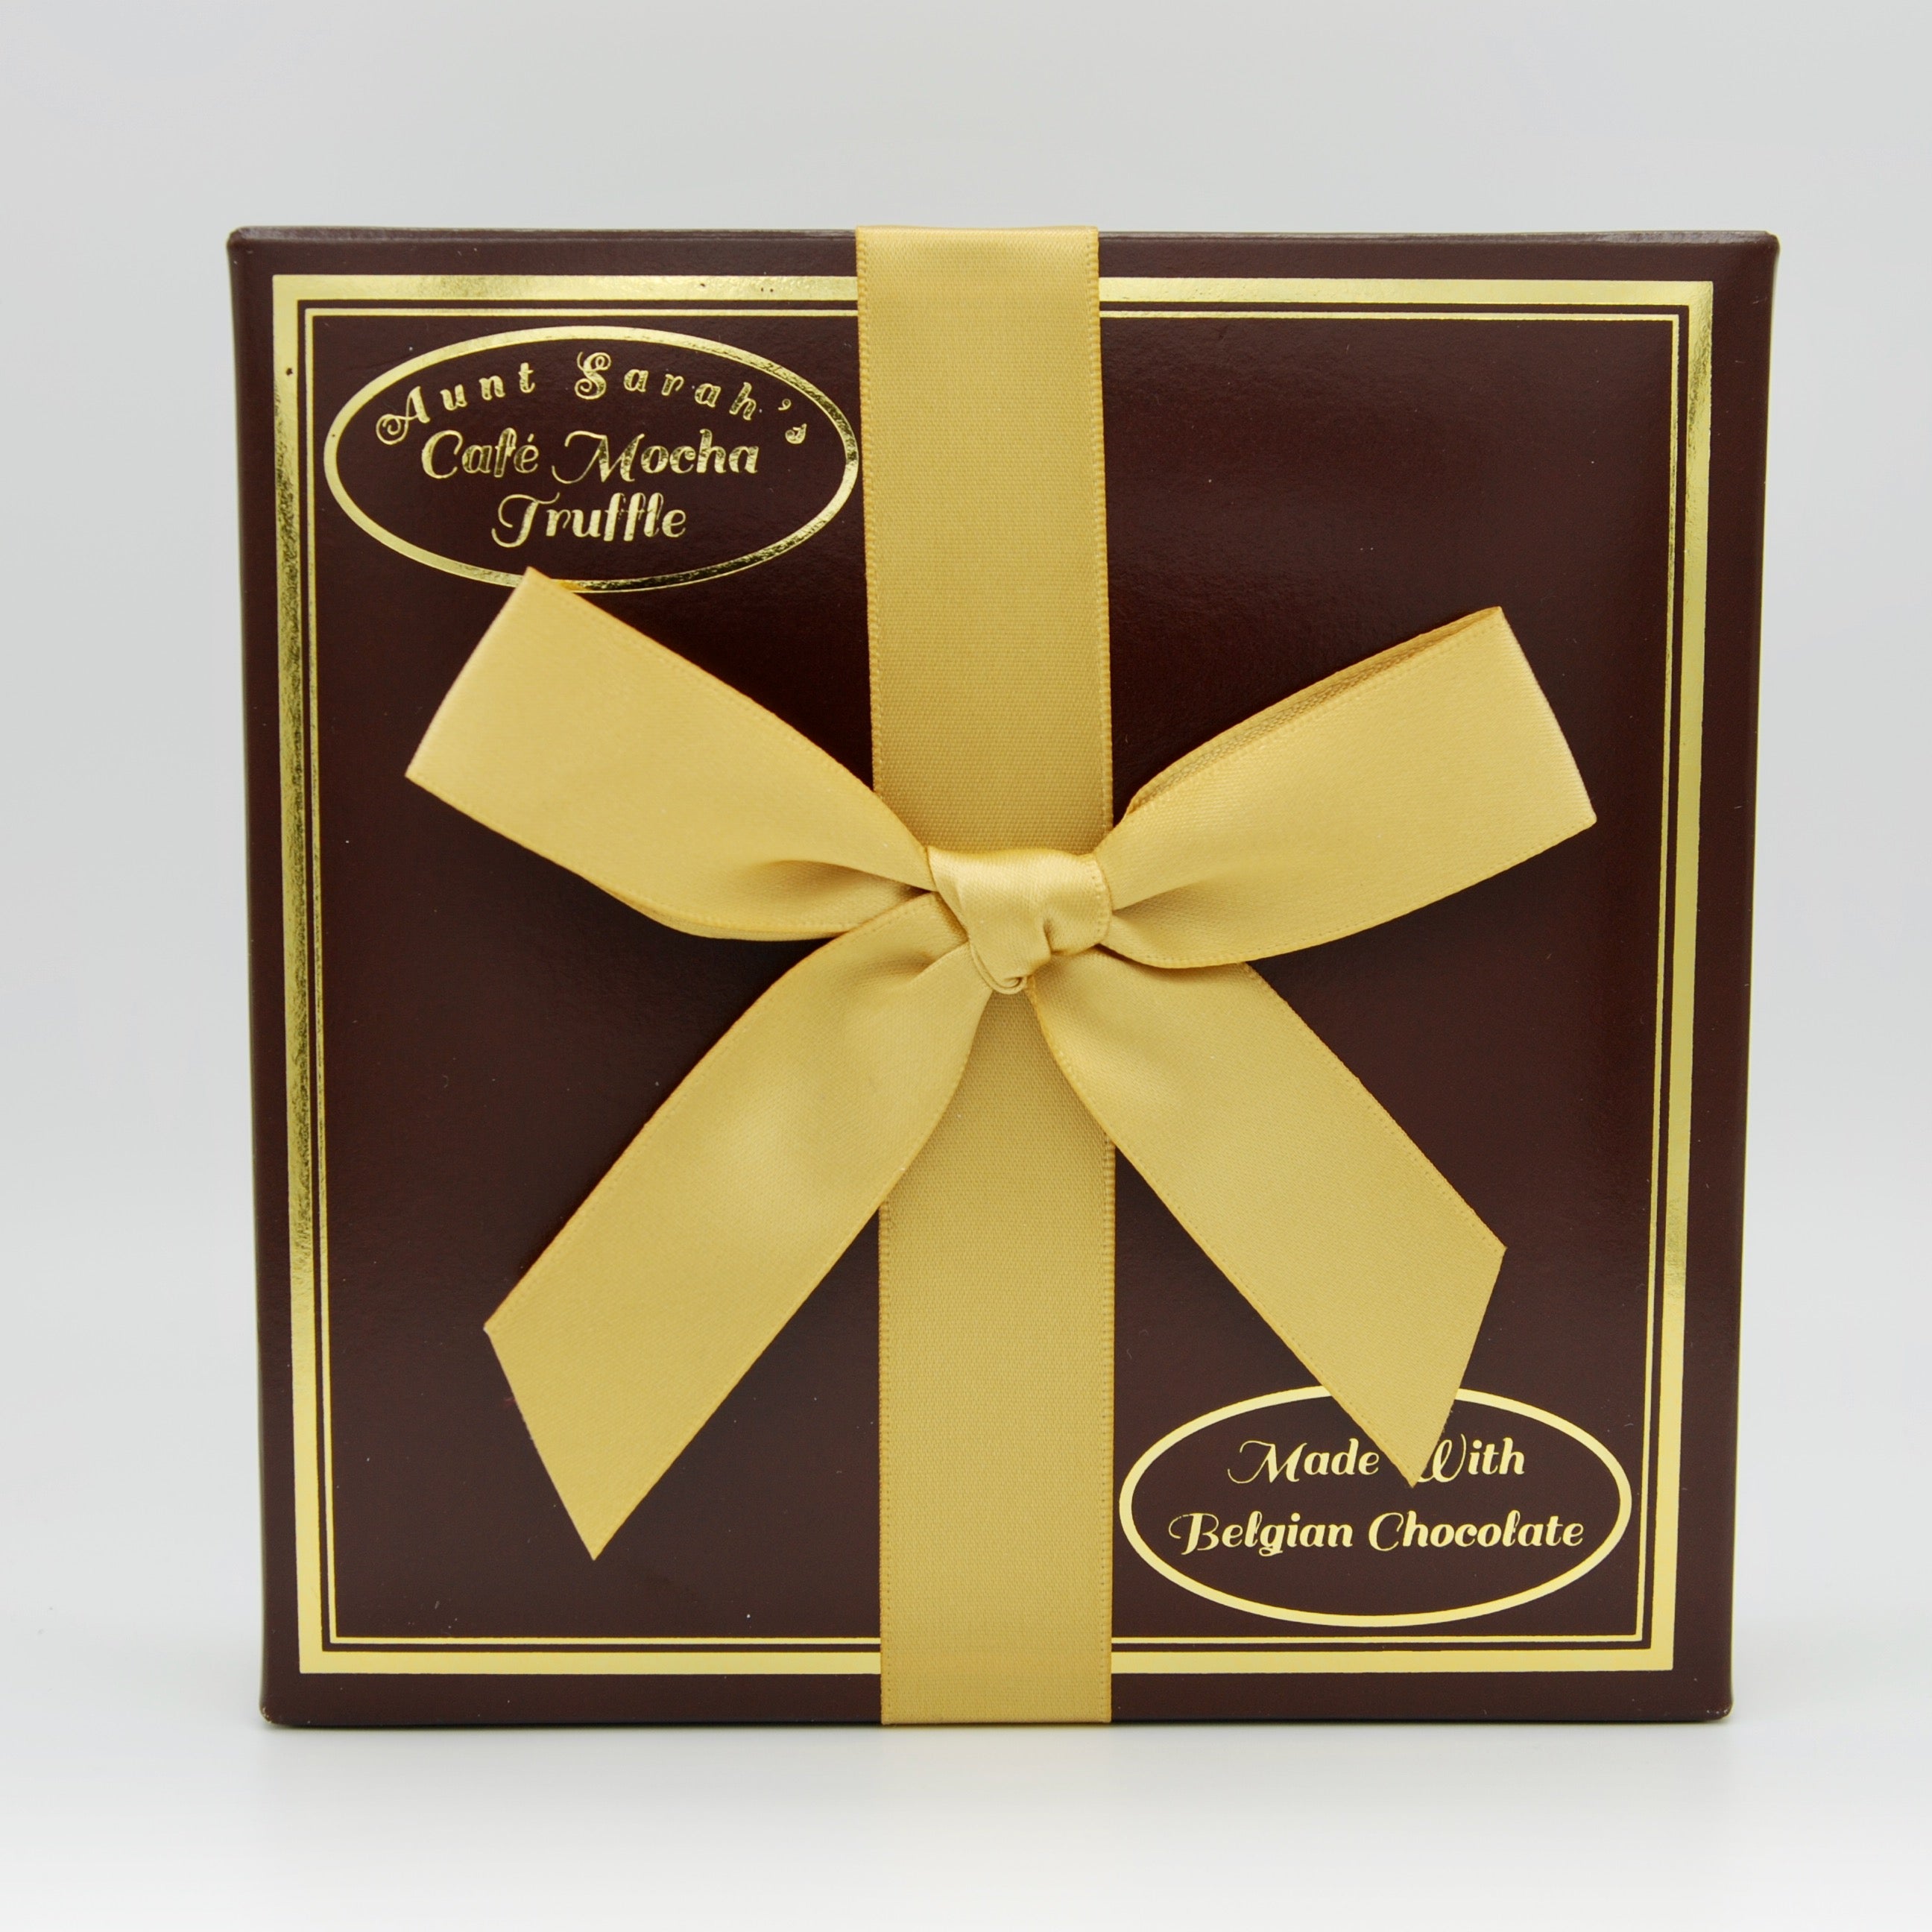 PURCHASE 2 CASES OF CHOCOLATE BARS and receive 1 FREE Milk Belgian Chocolate Café Mocha Truffles